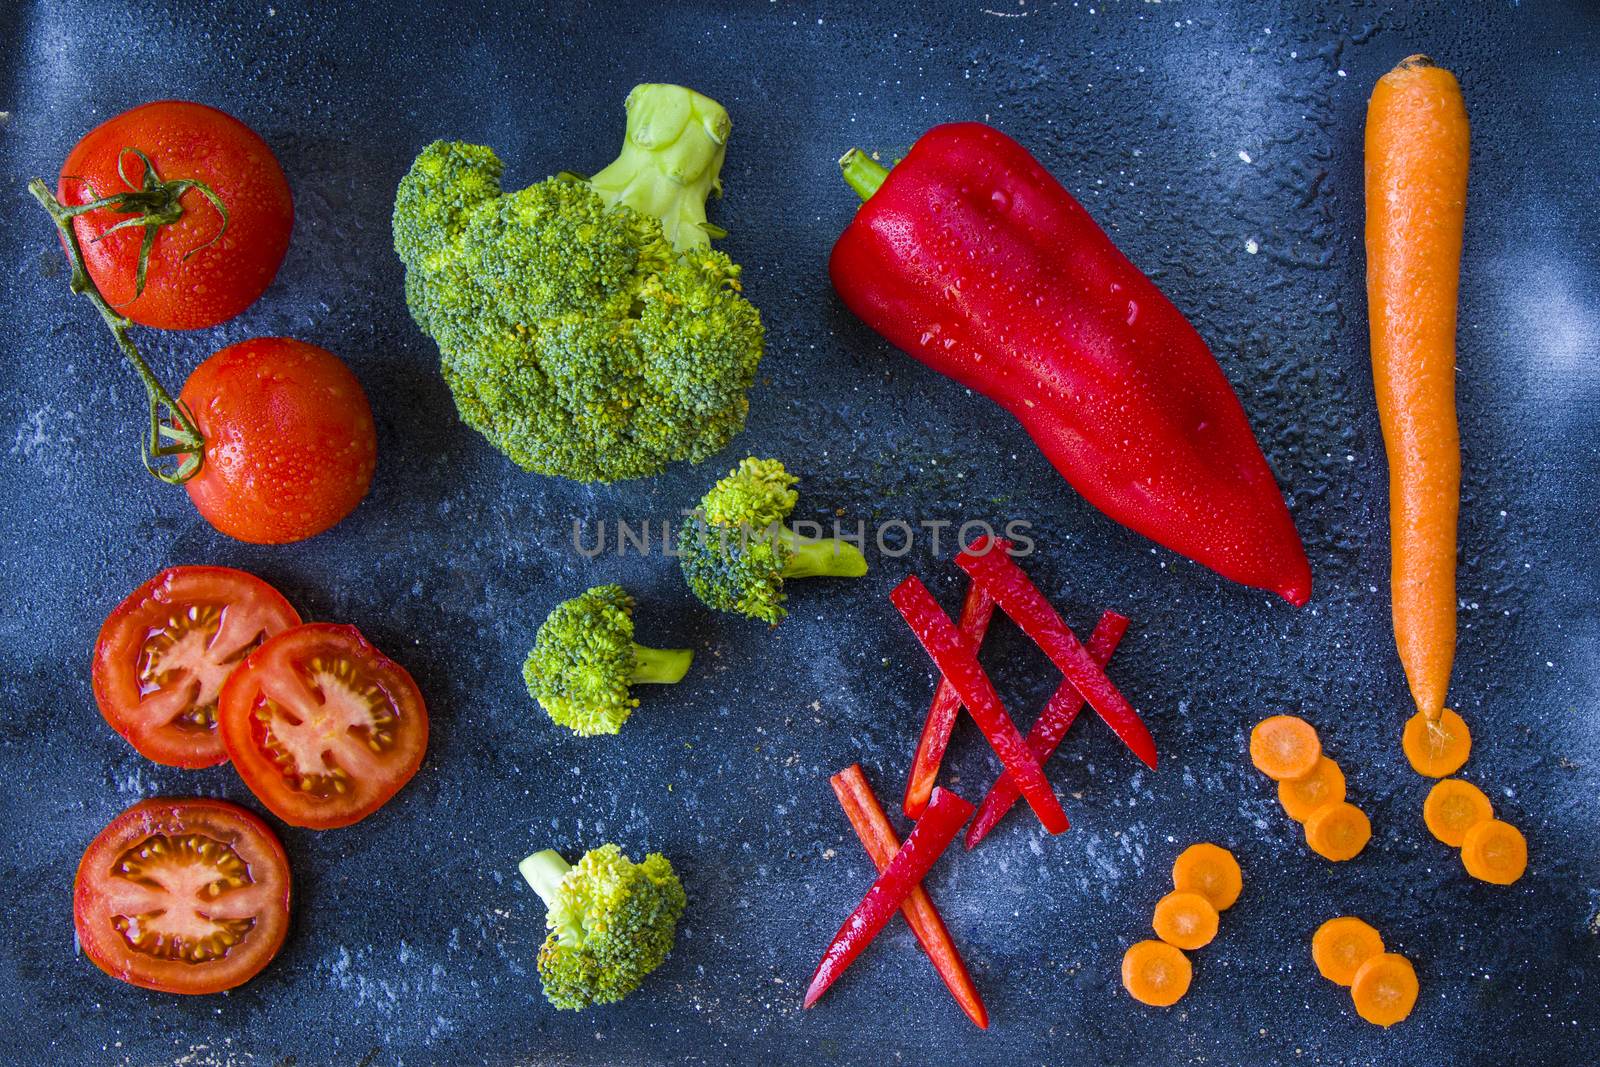 Chopped and cut vegetables on the board, carrot, bell pepper, tomato, broccoli by Taidundua